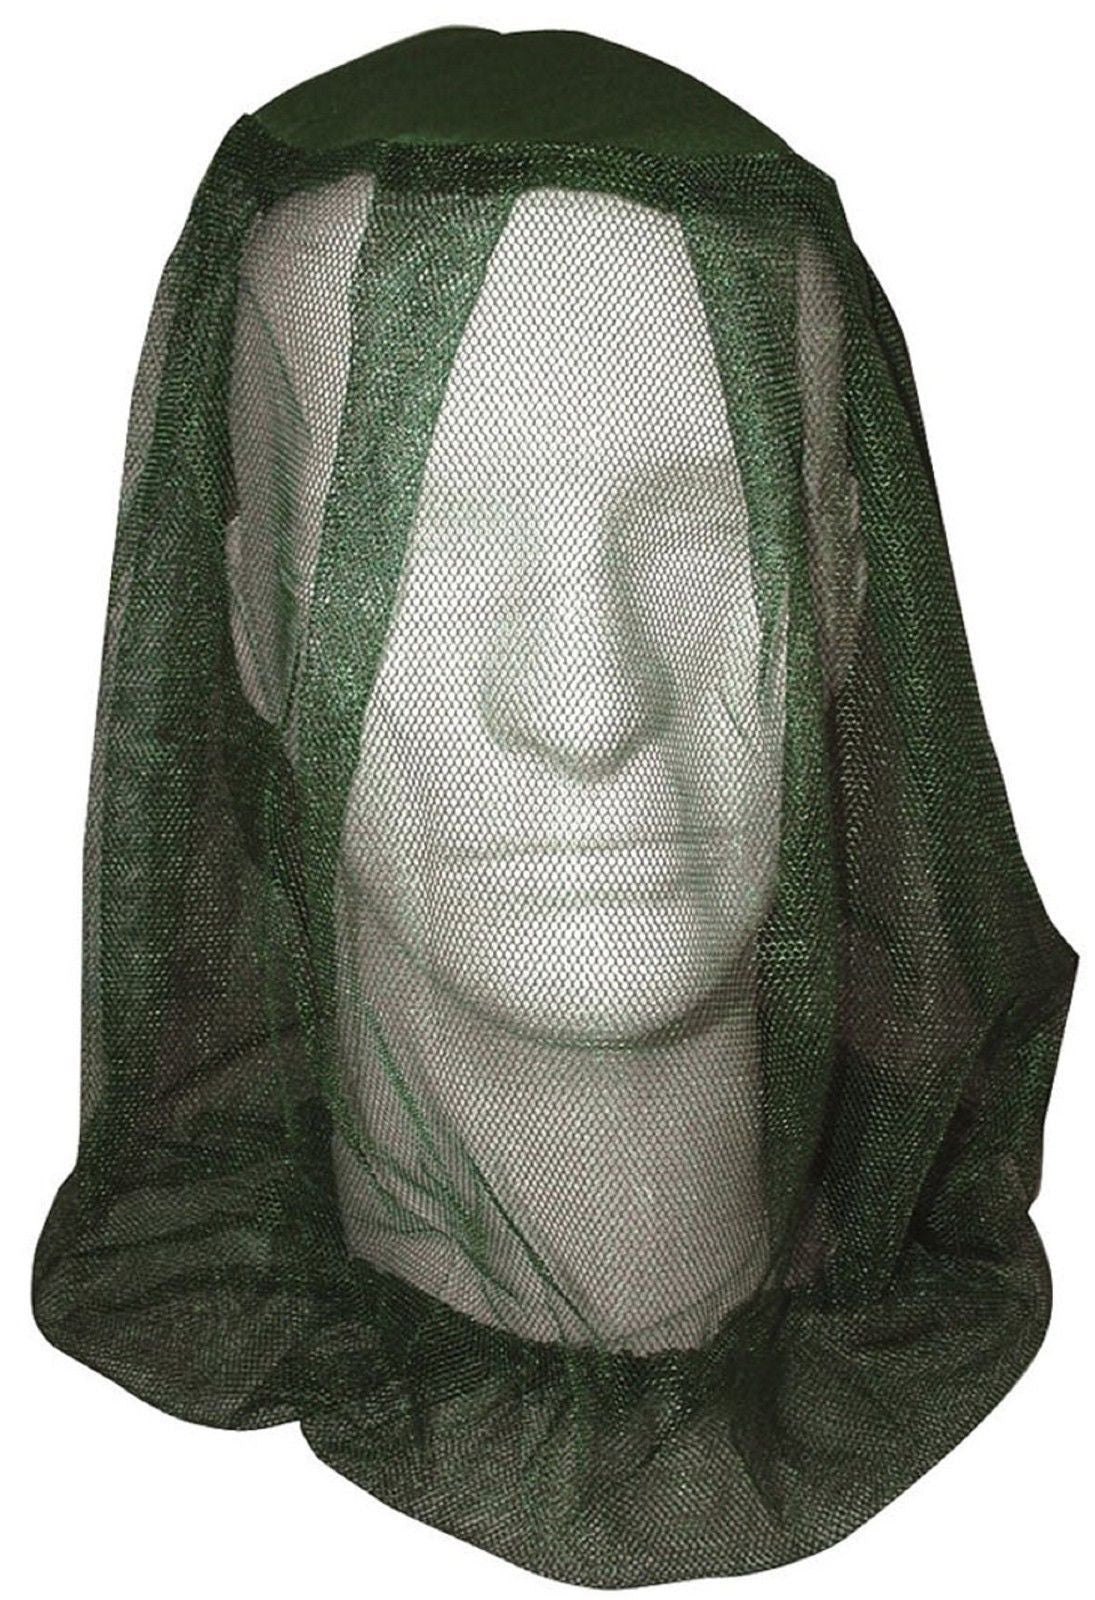 Olive Drab Fine-Knit Mesh Polyester Mosquito & Insect Head & Face Netting Net